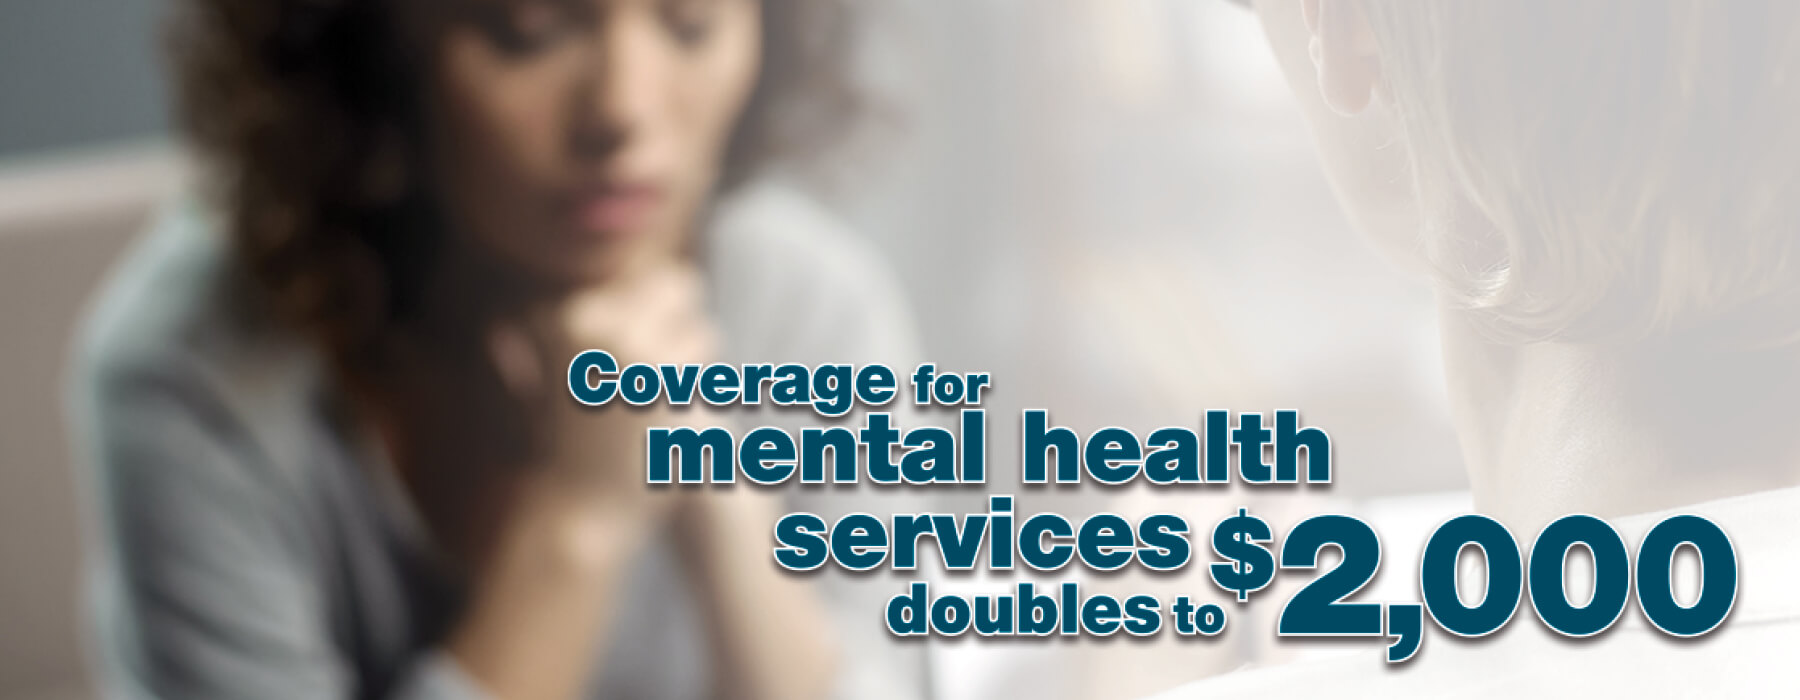 Coverage for mental health services doubles